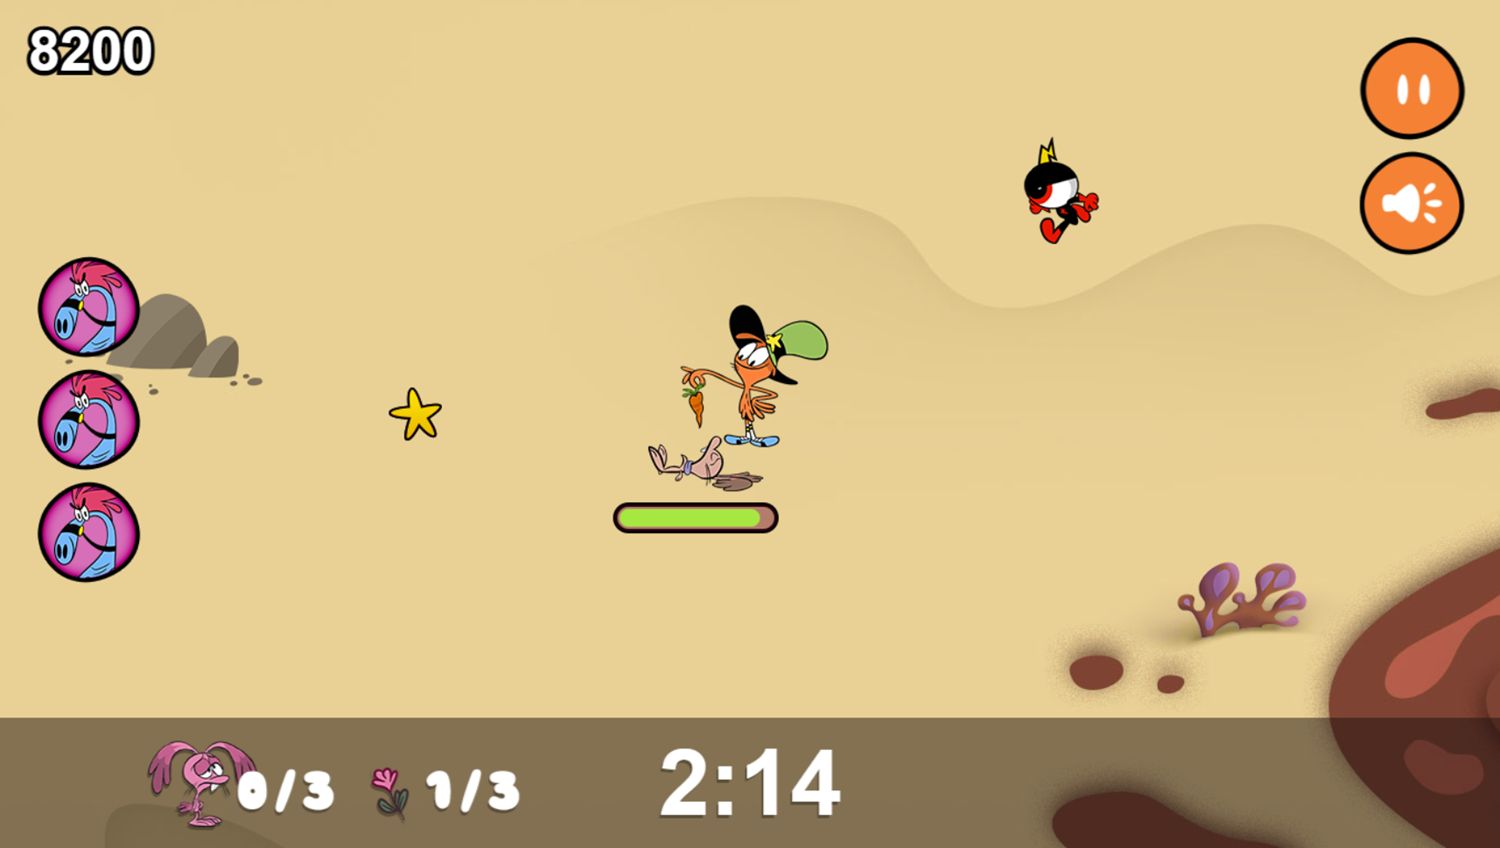 Wander Over Yonder the Helpin' Hands Game Play Screenshot.